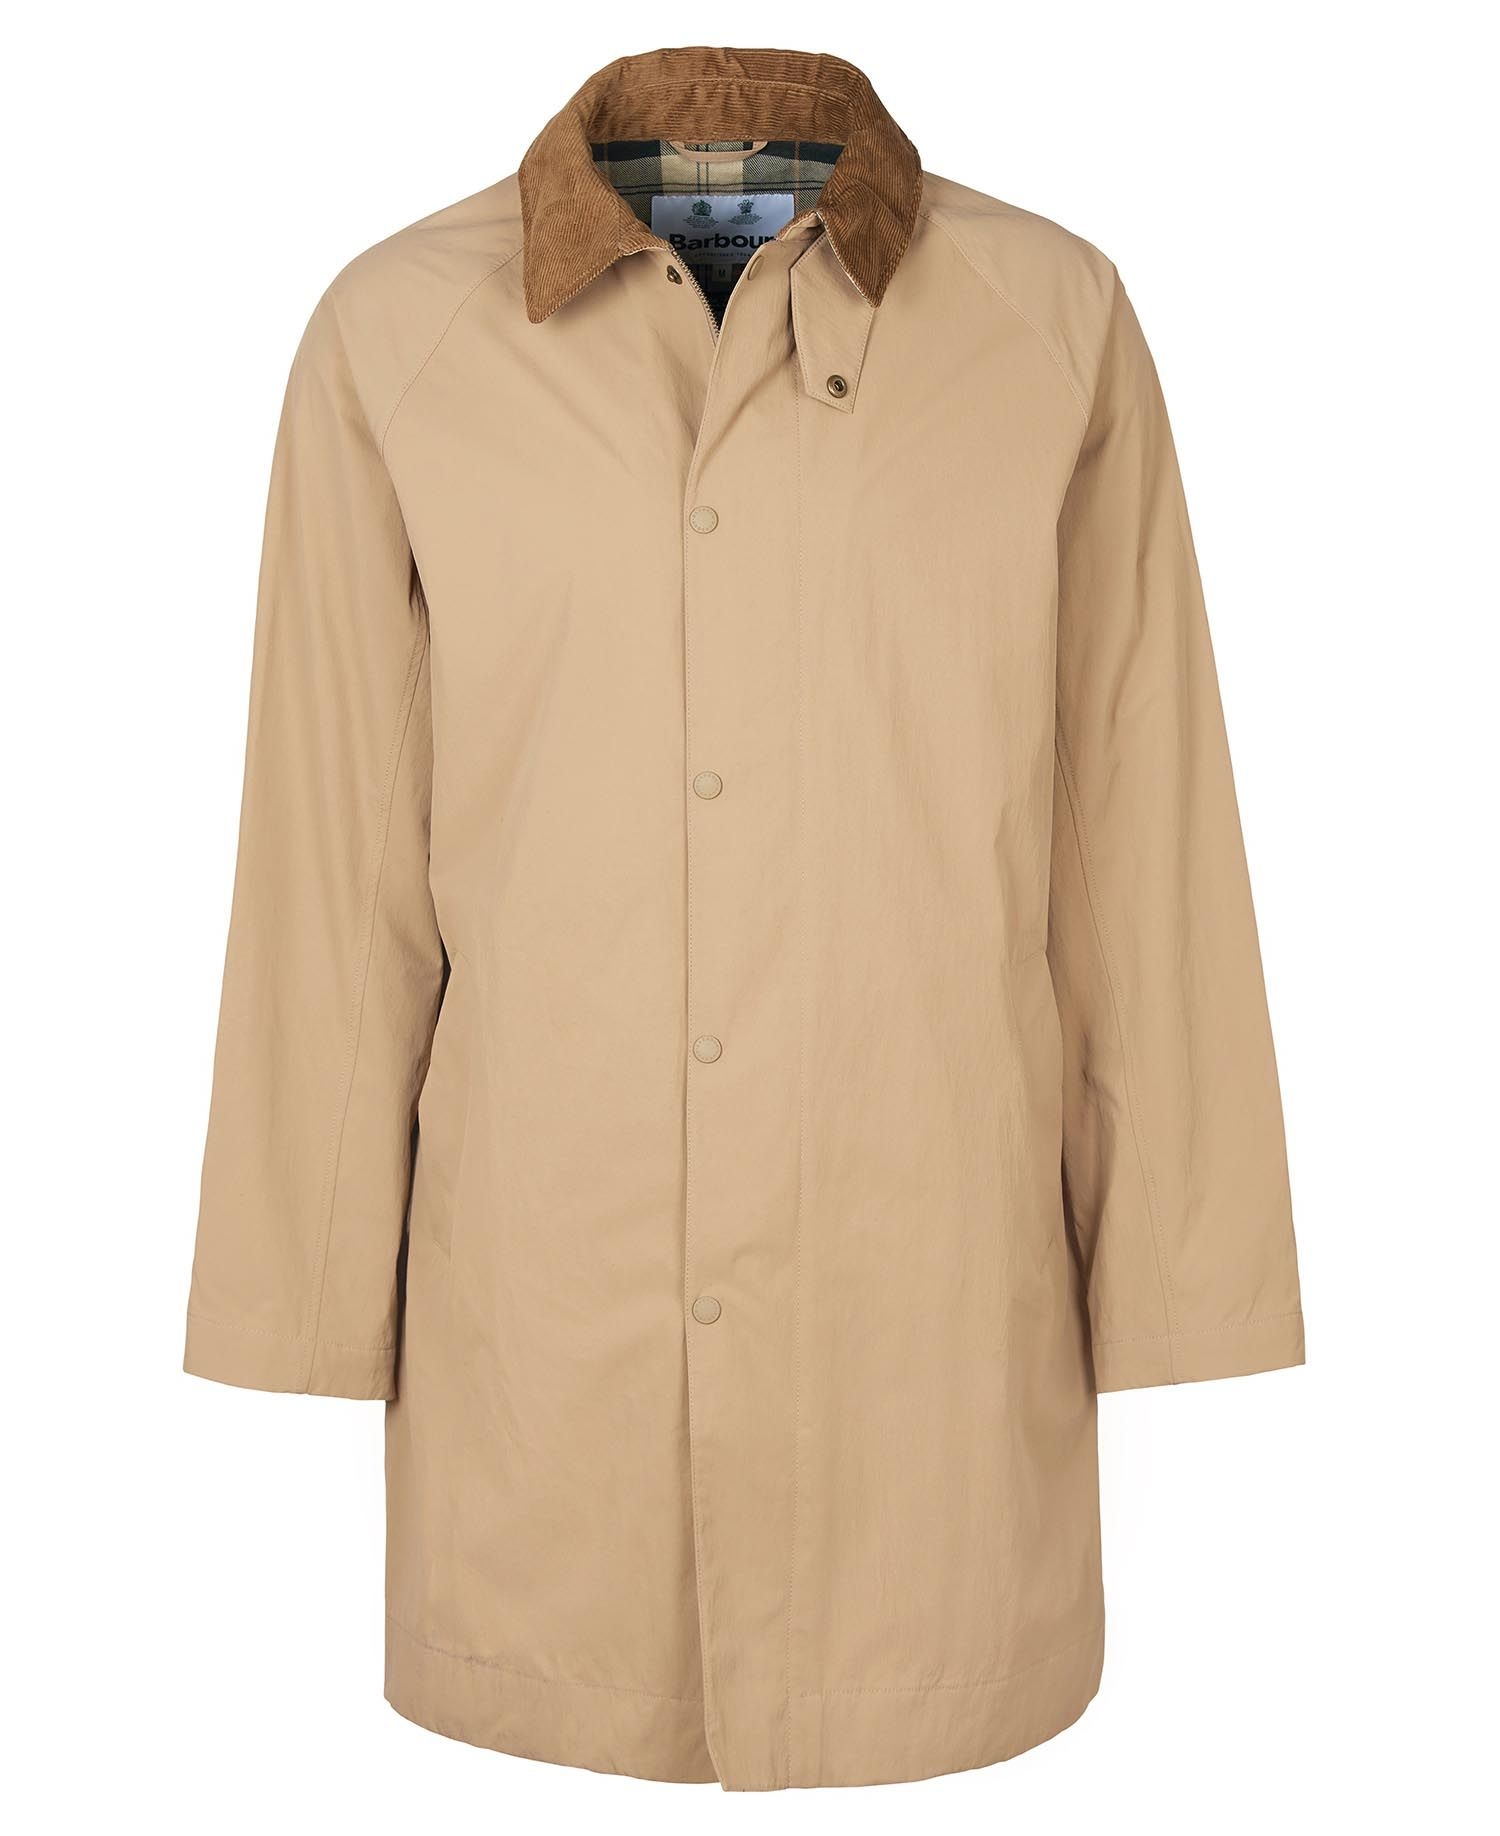 Barbour Barbour Ashi Mac Jacket Trench